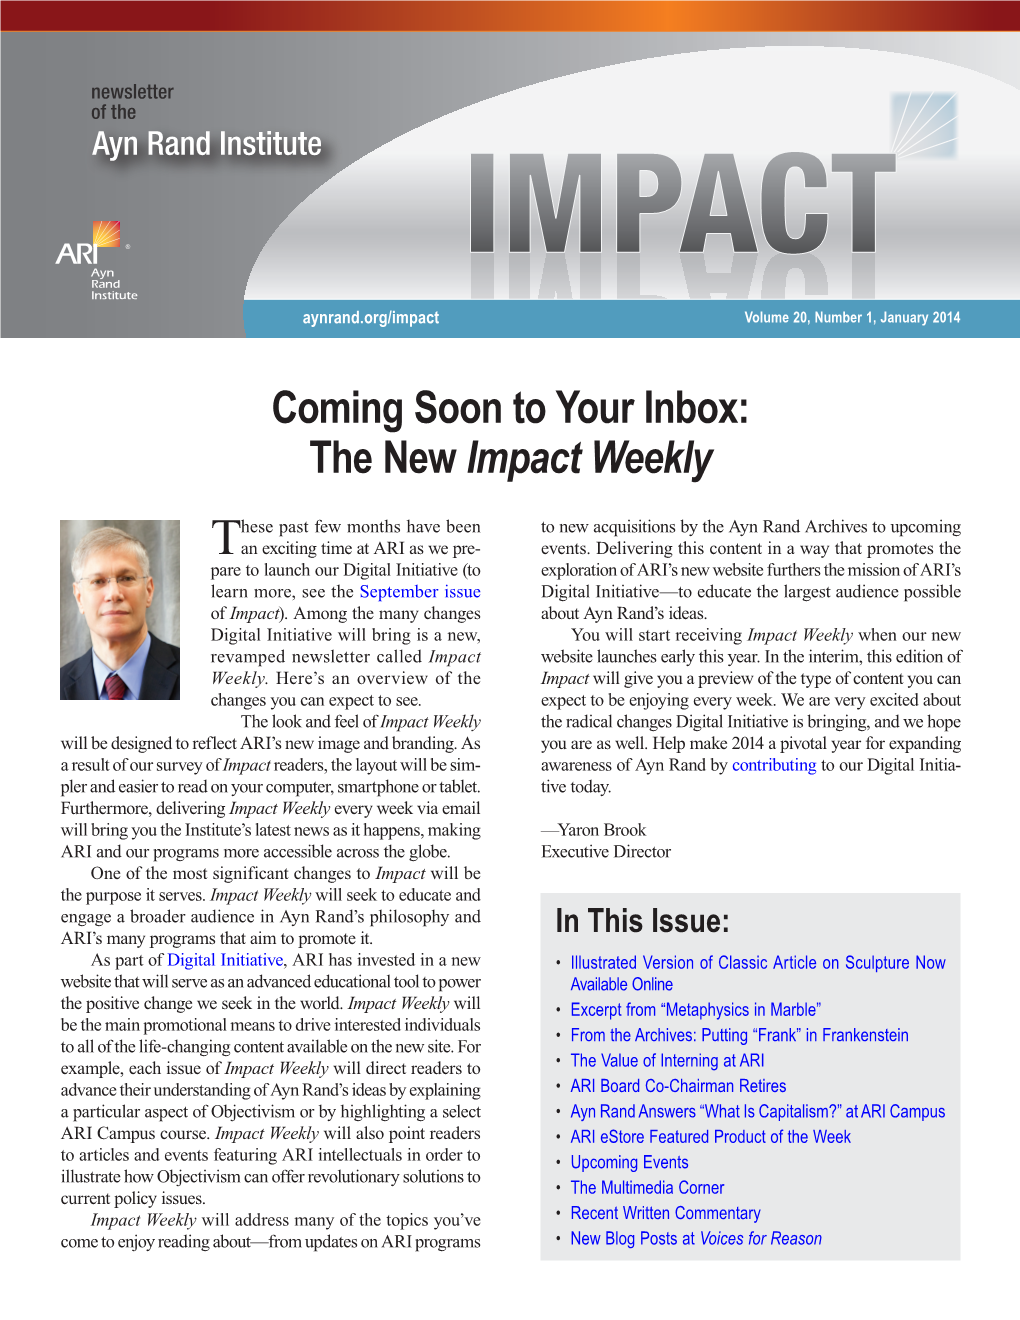 Coming Soon to Your Inbox: the New Impact Weekly